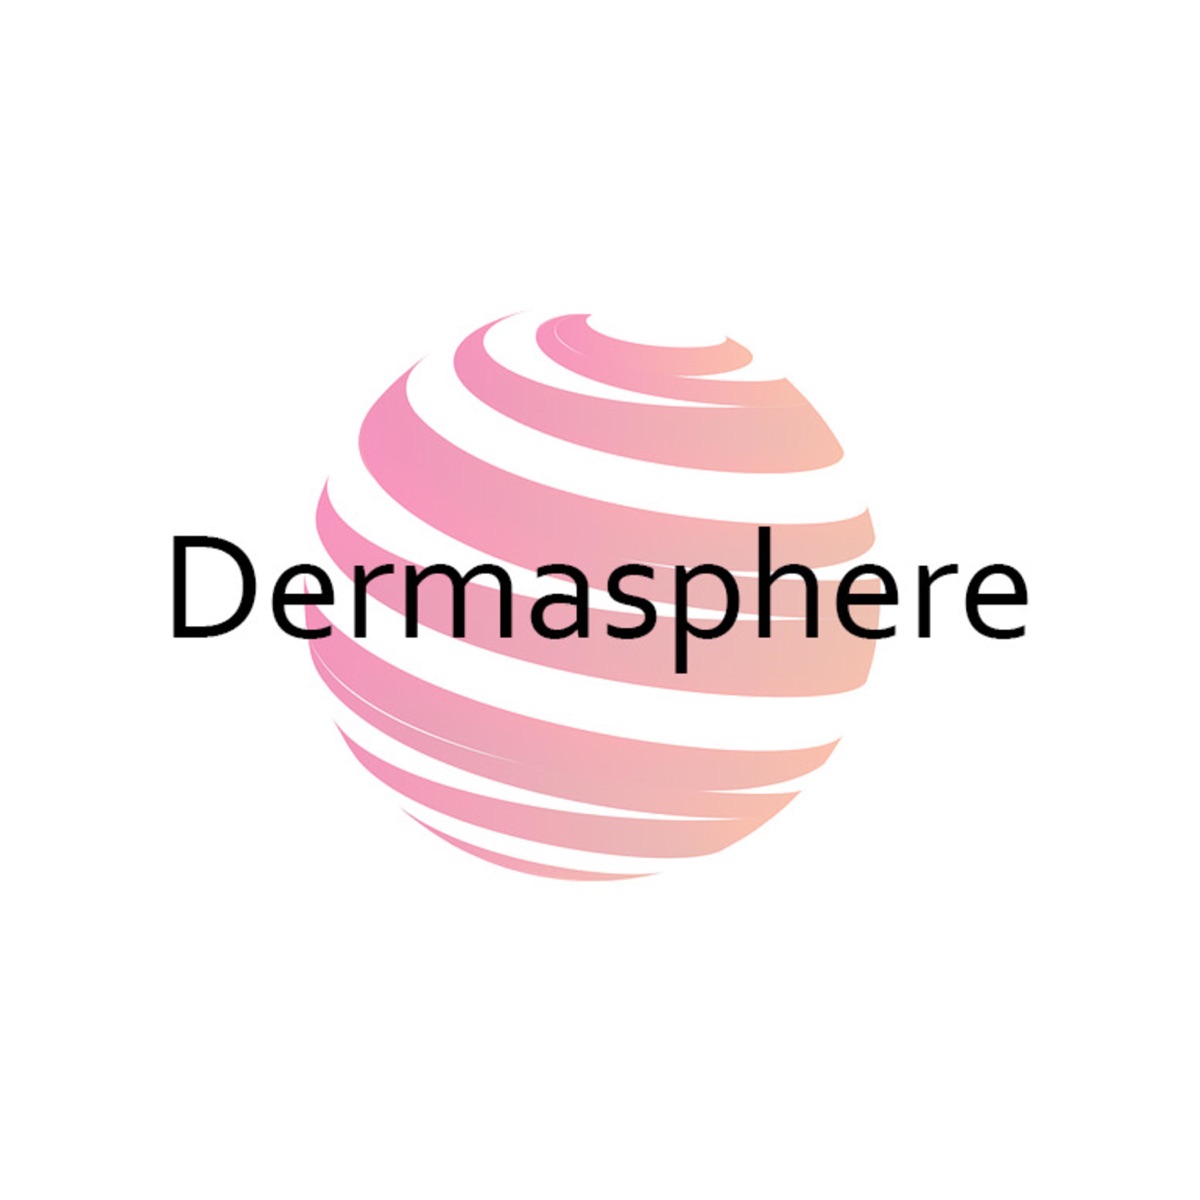 Image of podcast Dermasphere: The Dermatology Podcast